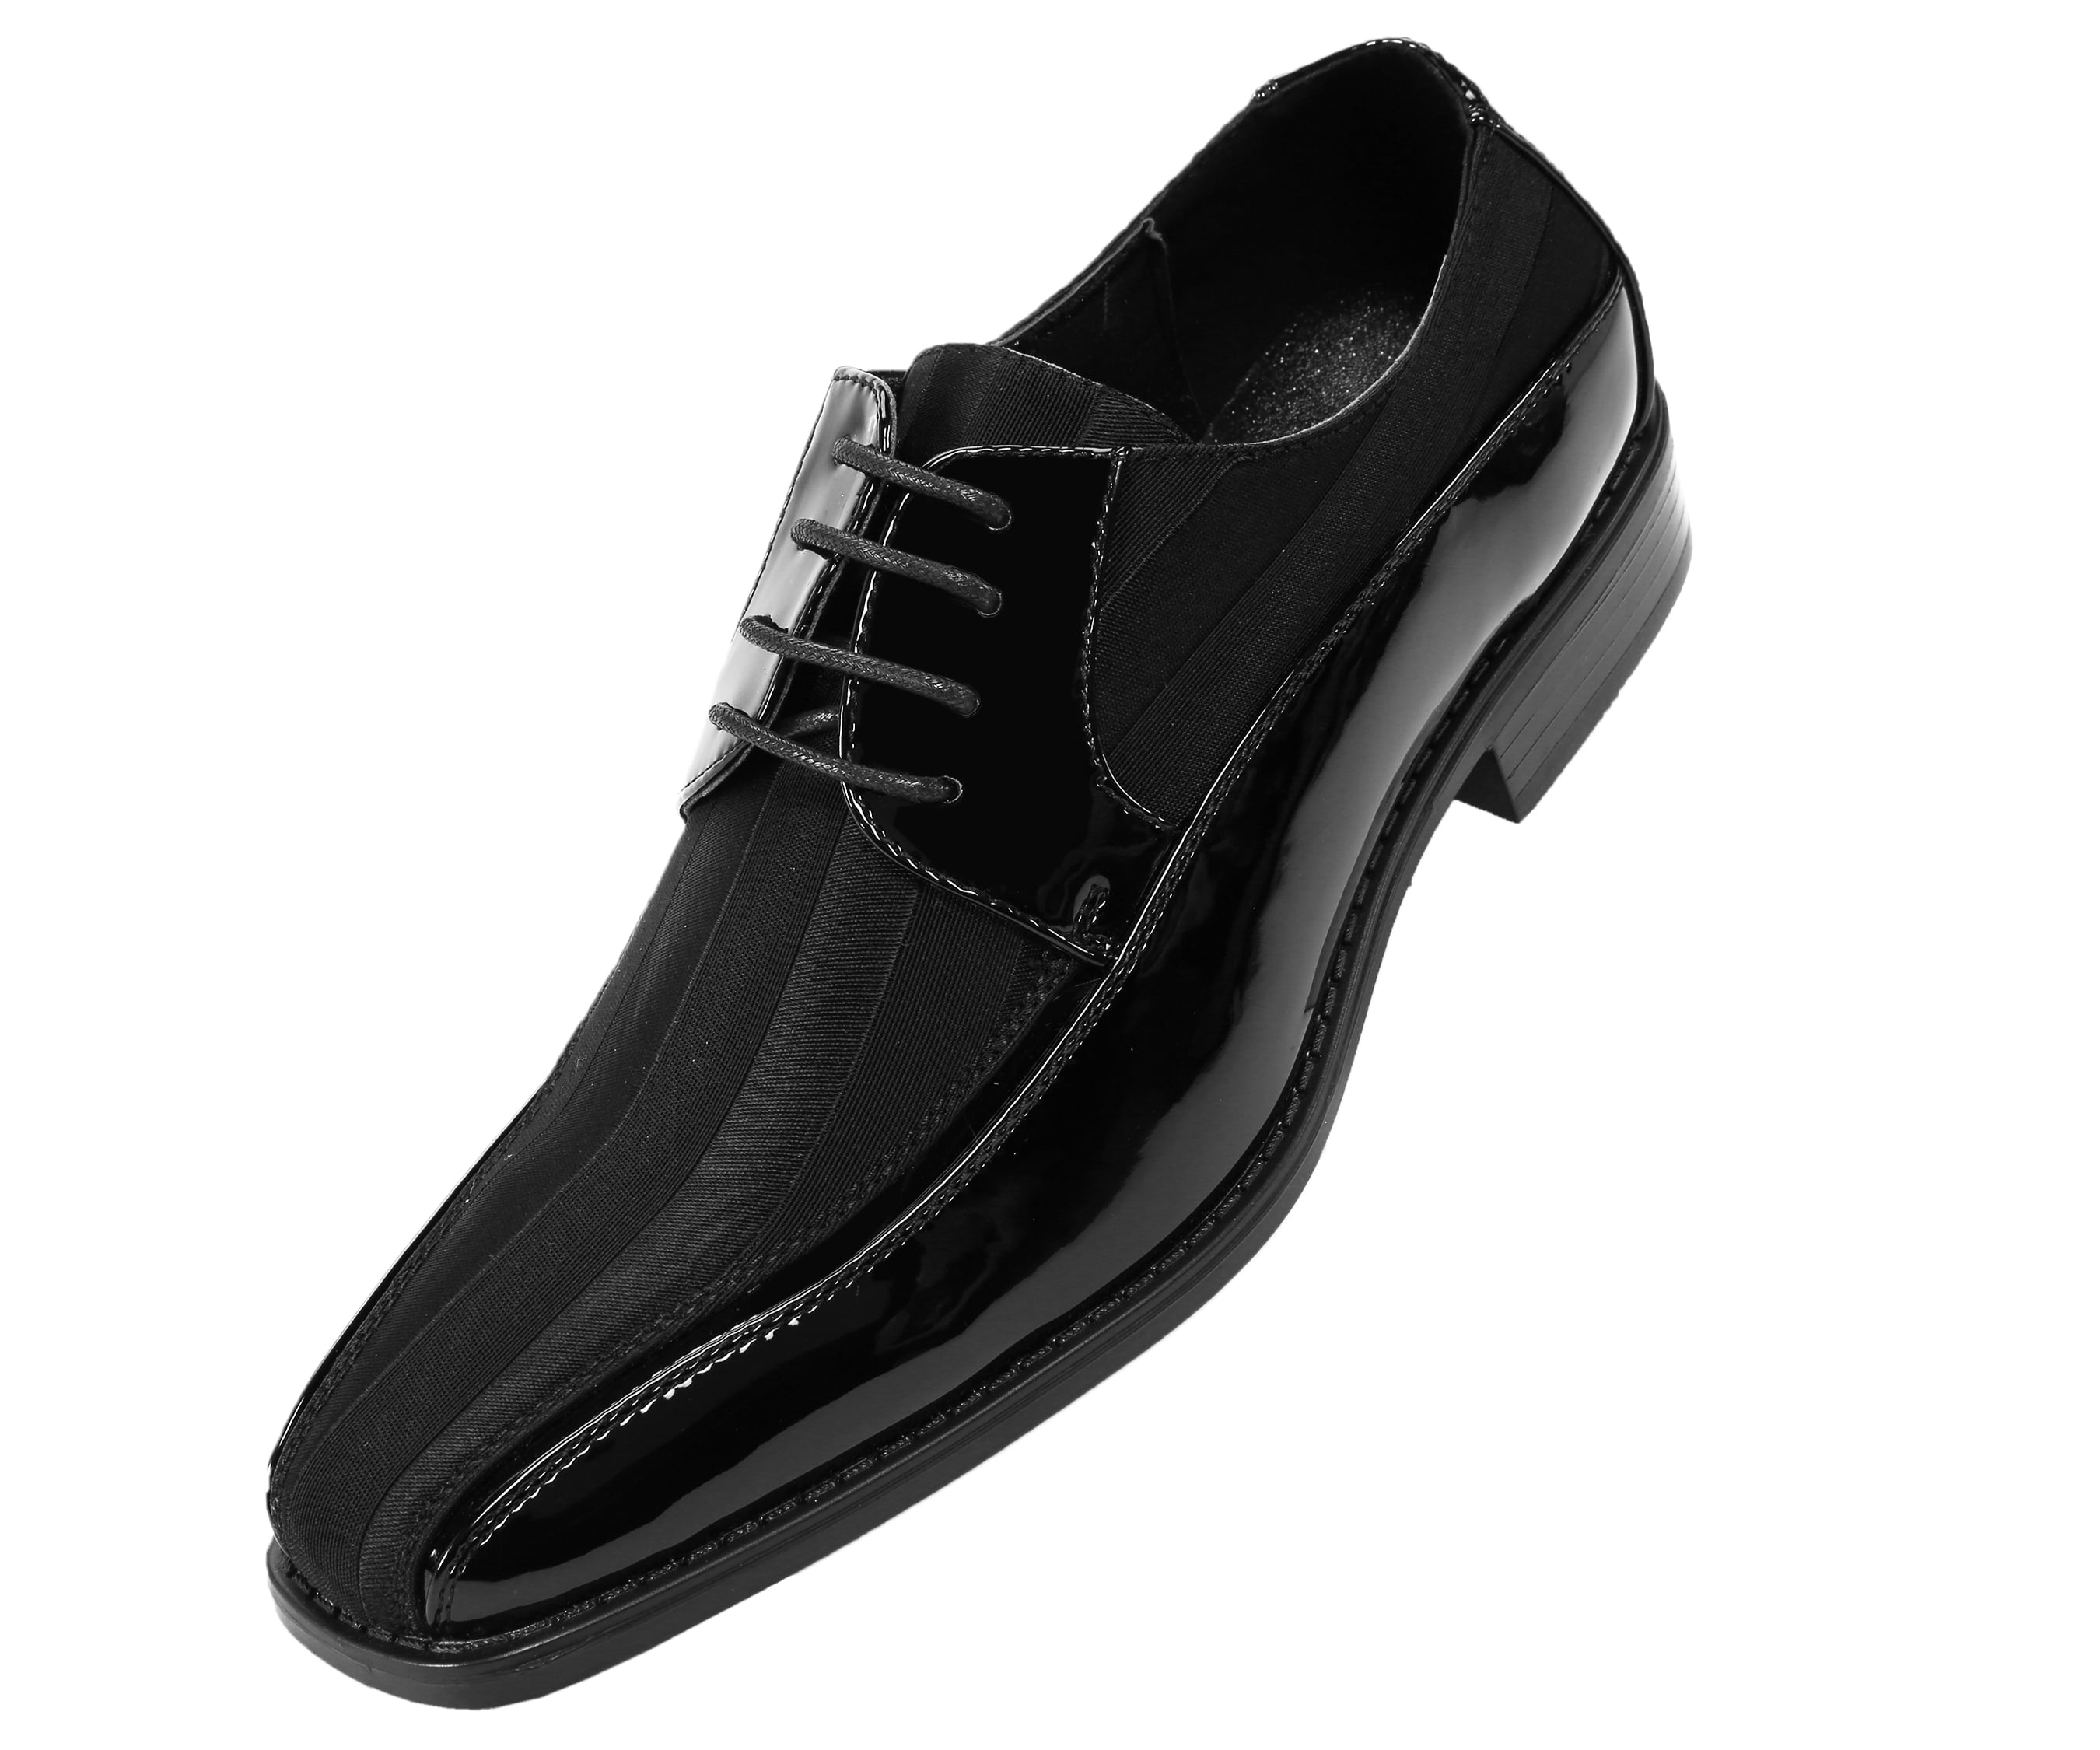 Details about   Men Handmade Shoes Brogue Black Leather Lace Up Formal Dress Casual Wear Boots 